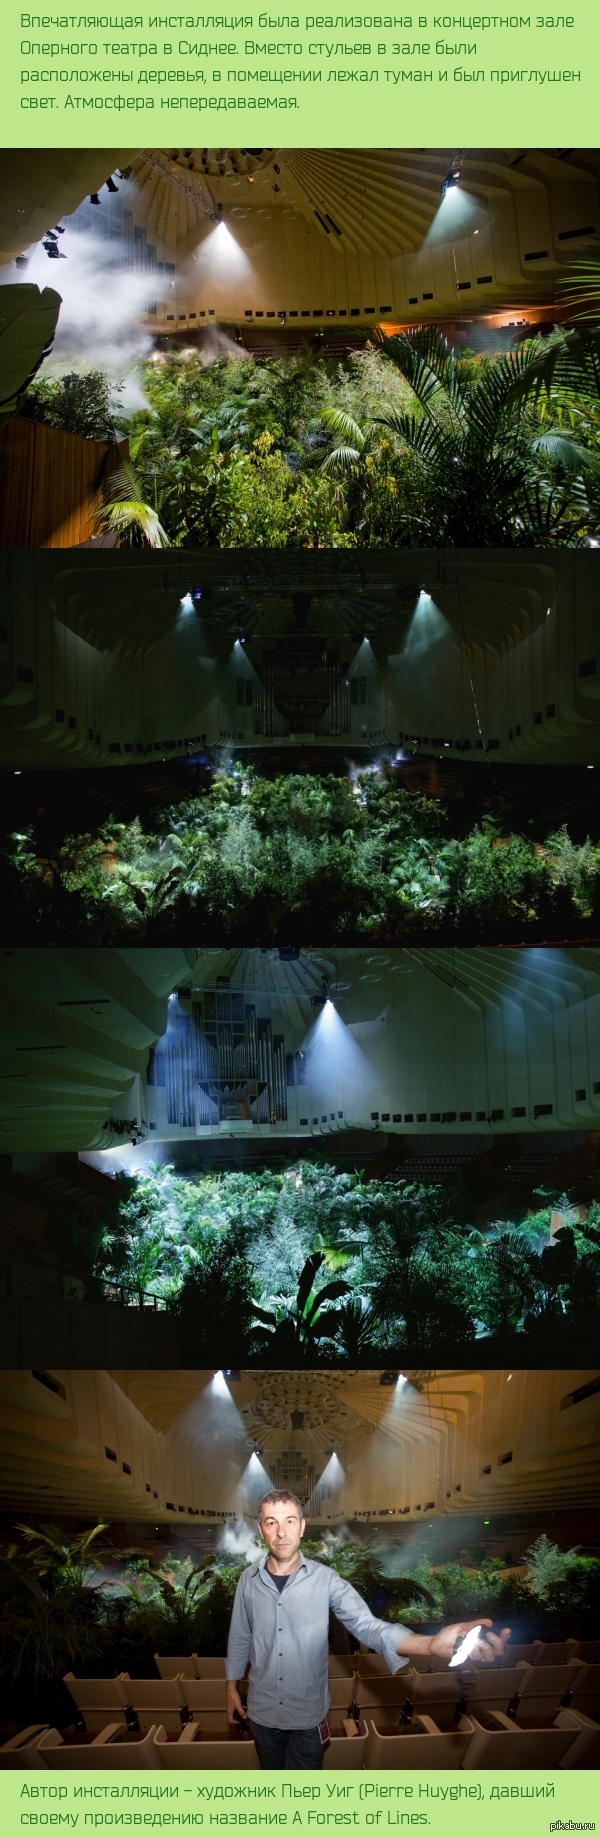     Pierre Huyghe, "A Forest of Lines"